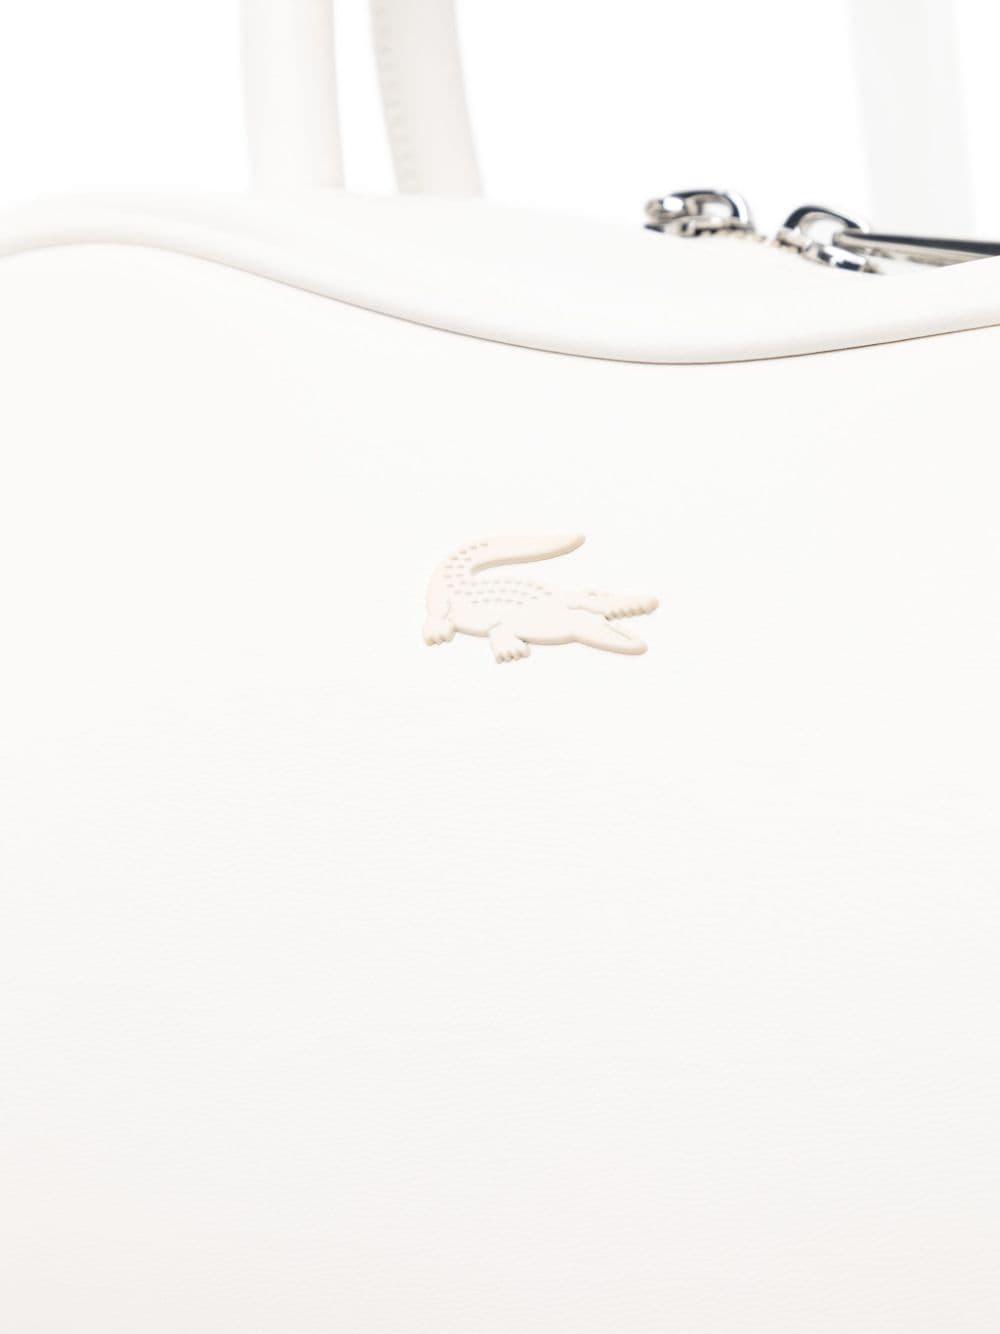 Lacoste Small Lora Leather Crossbody Bag in White | Lyst